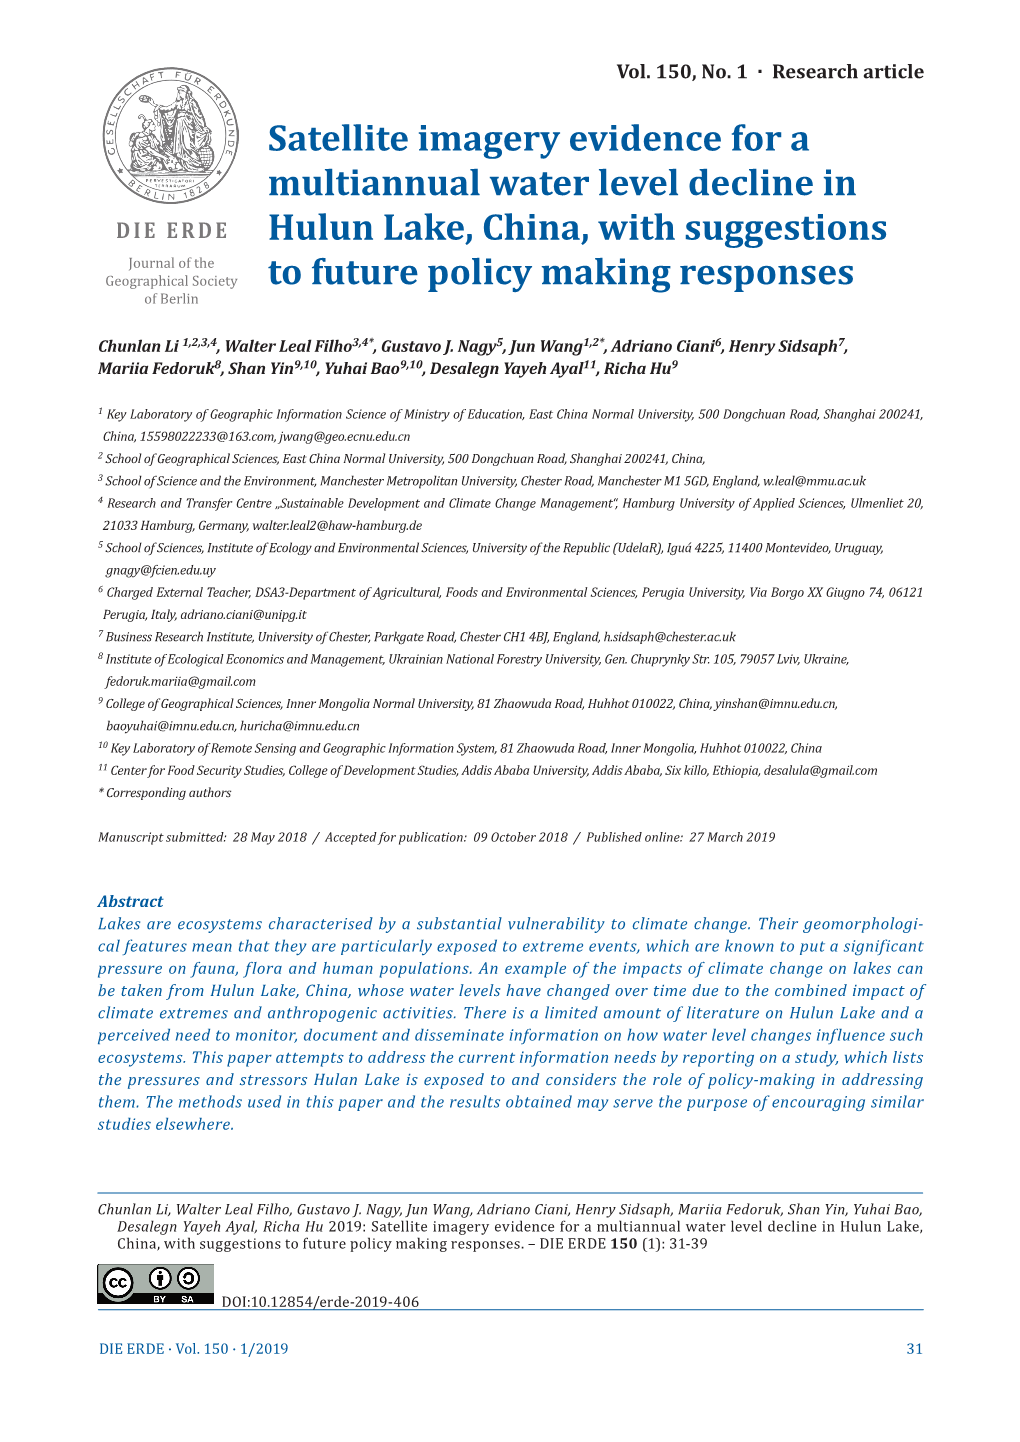 Satellite Imagery Evidence for a Multiannual Water Level Decline in Hulun Lake, China, with Suggestions to Future Policy Making Responses